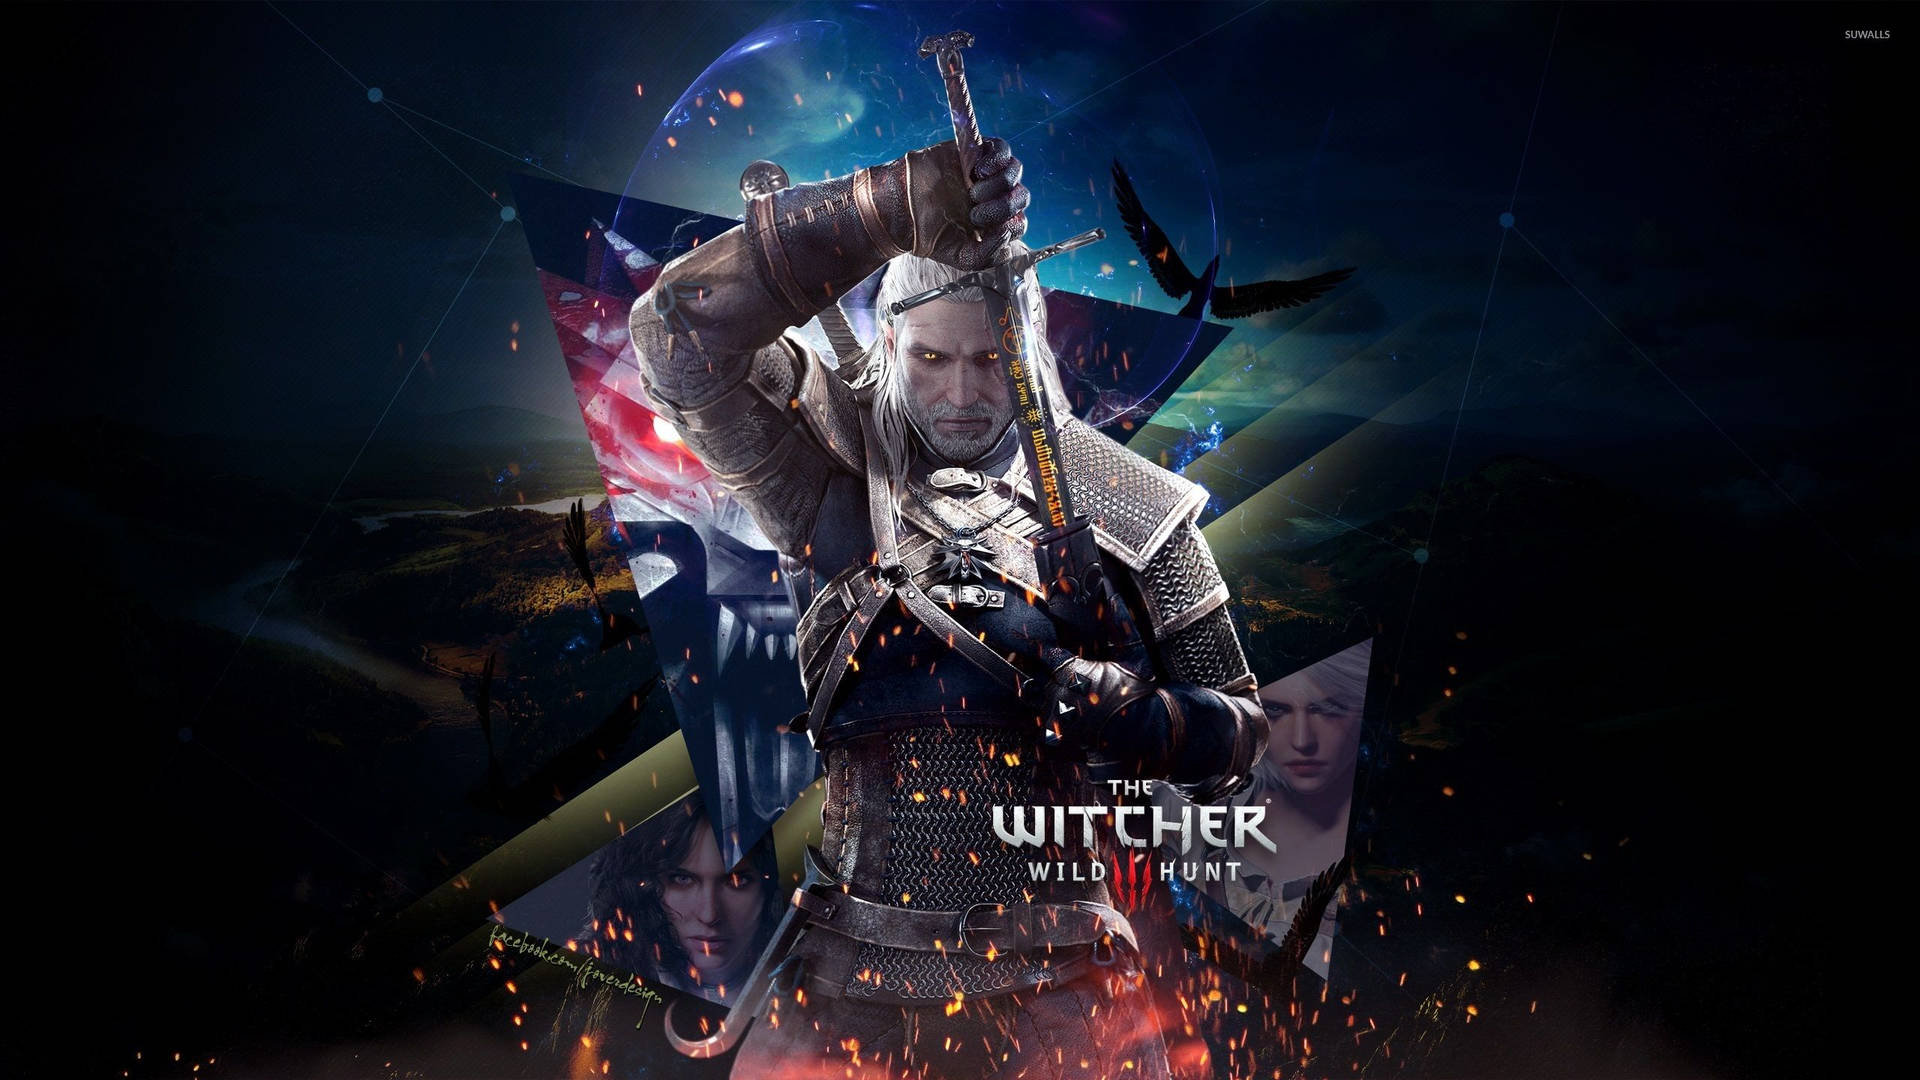 The Witcher 3: Wild Hunt [6] Wallpaper - Game Wallpaper